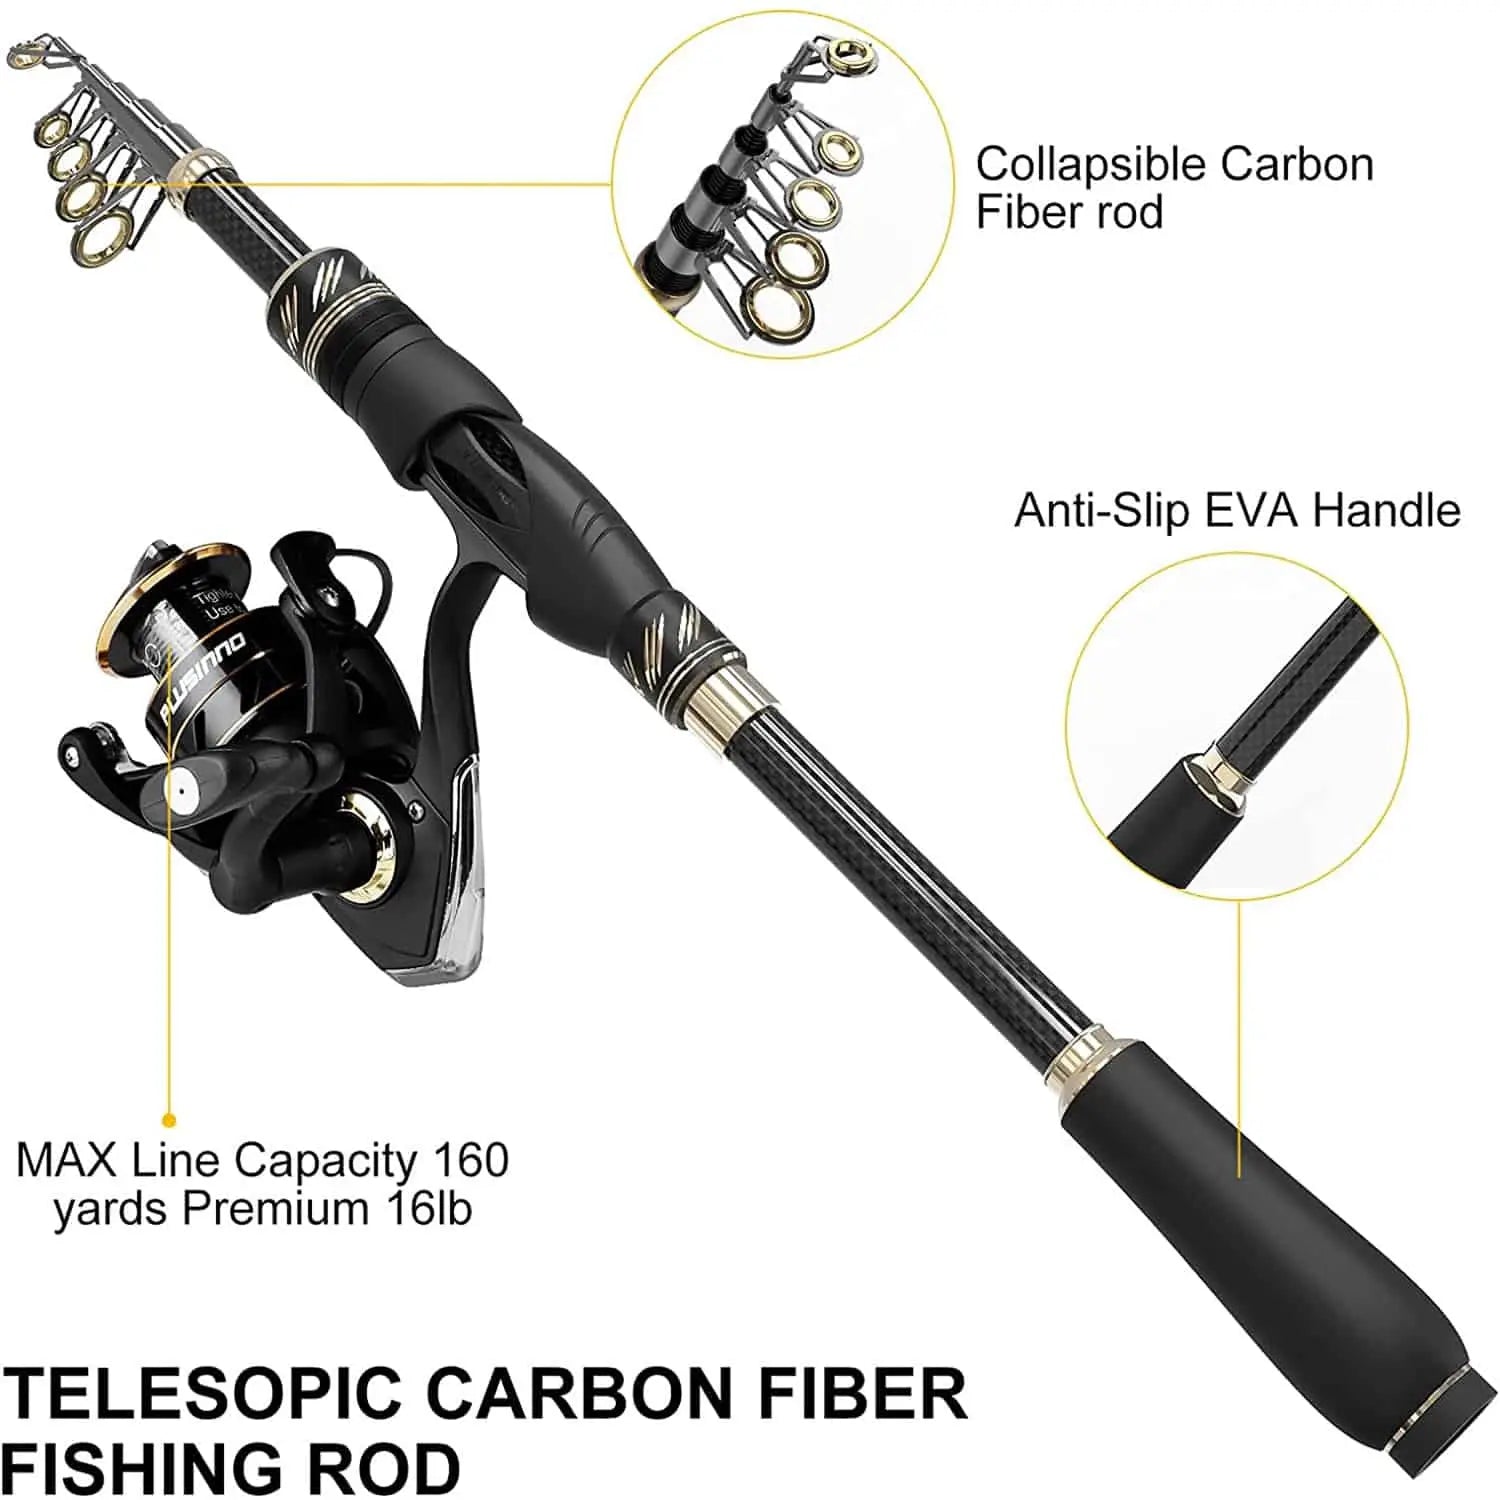 PLUSINNO Eagle HuntingⅠTelescopic Fishing Rods and Reel Combos – Plusinno